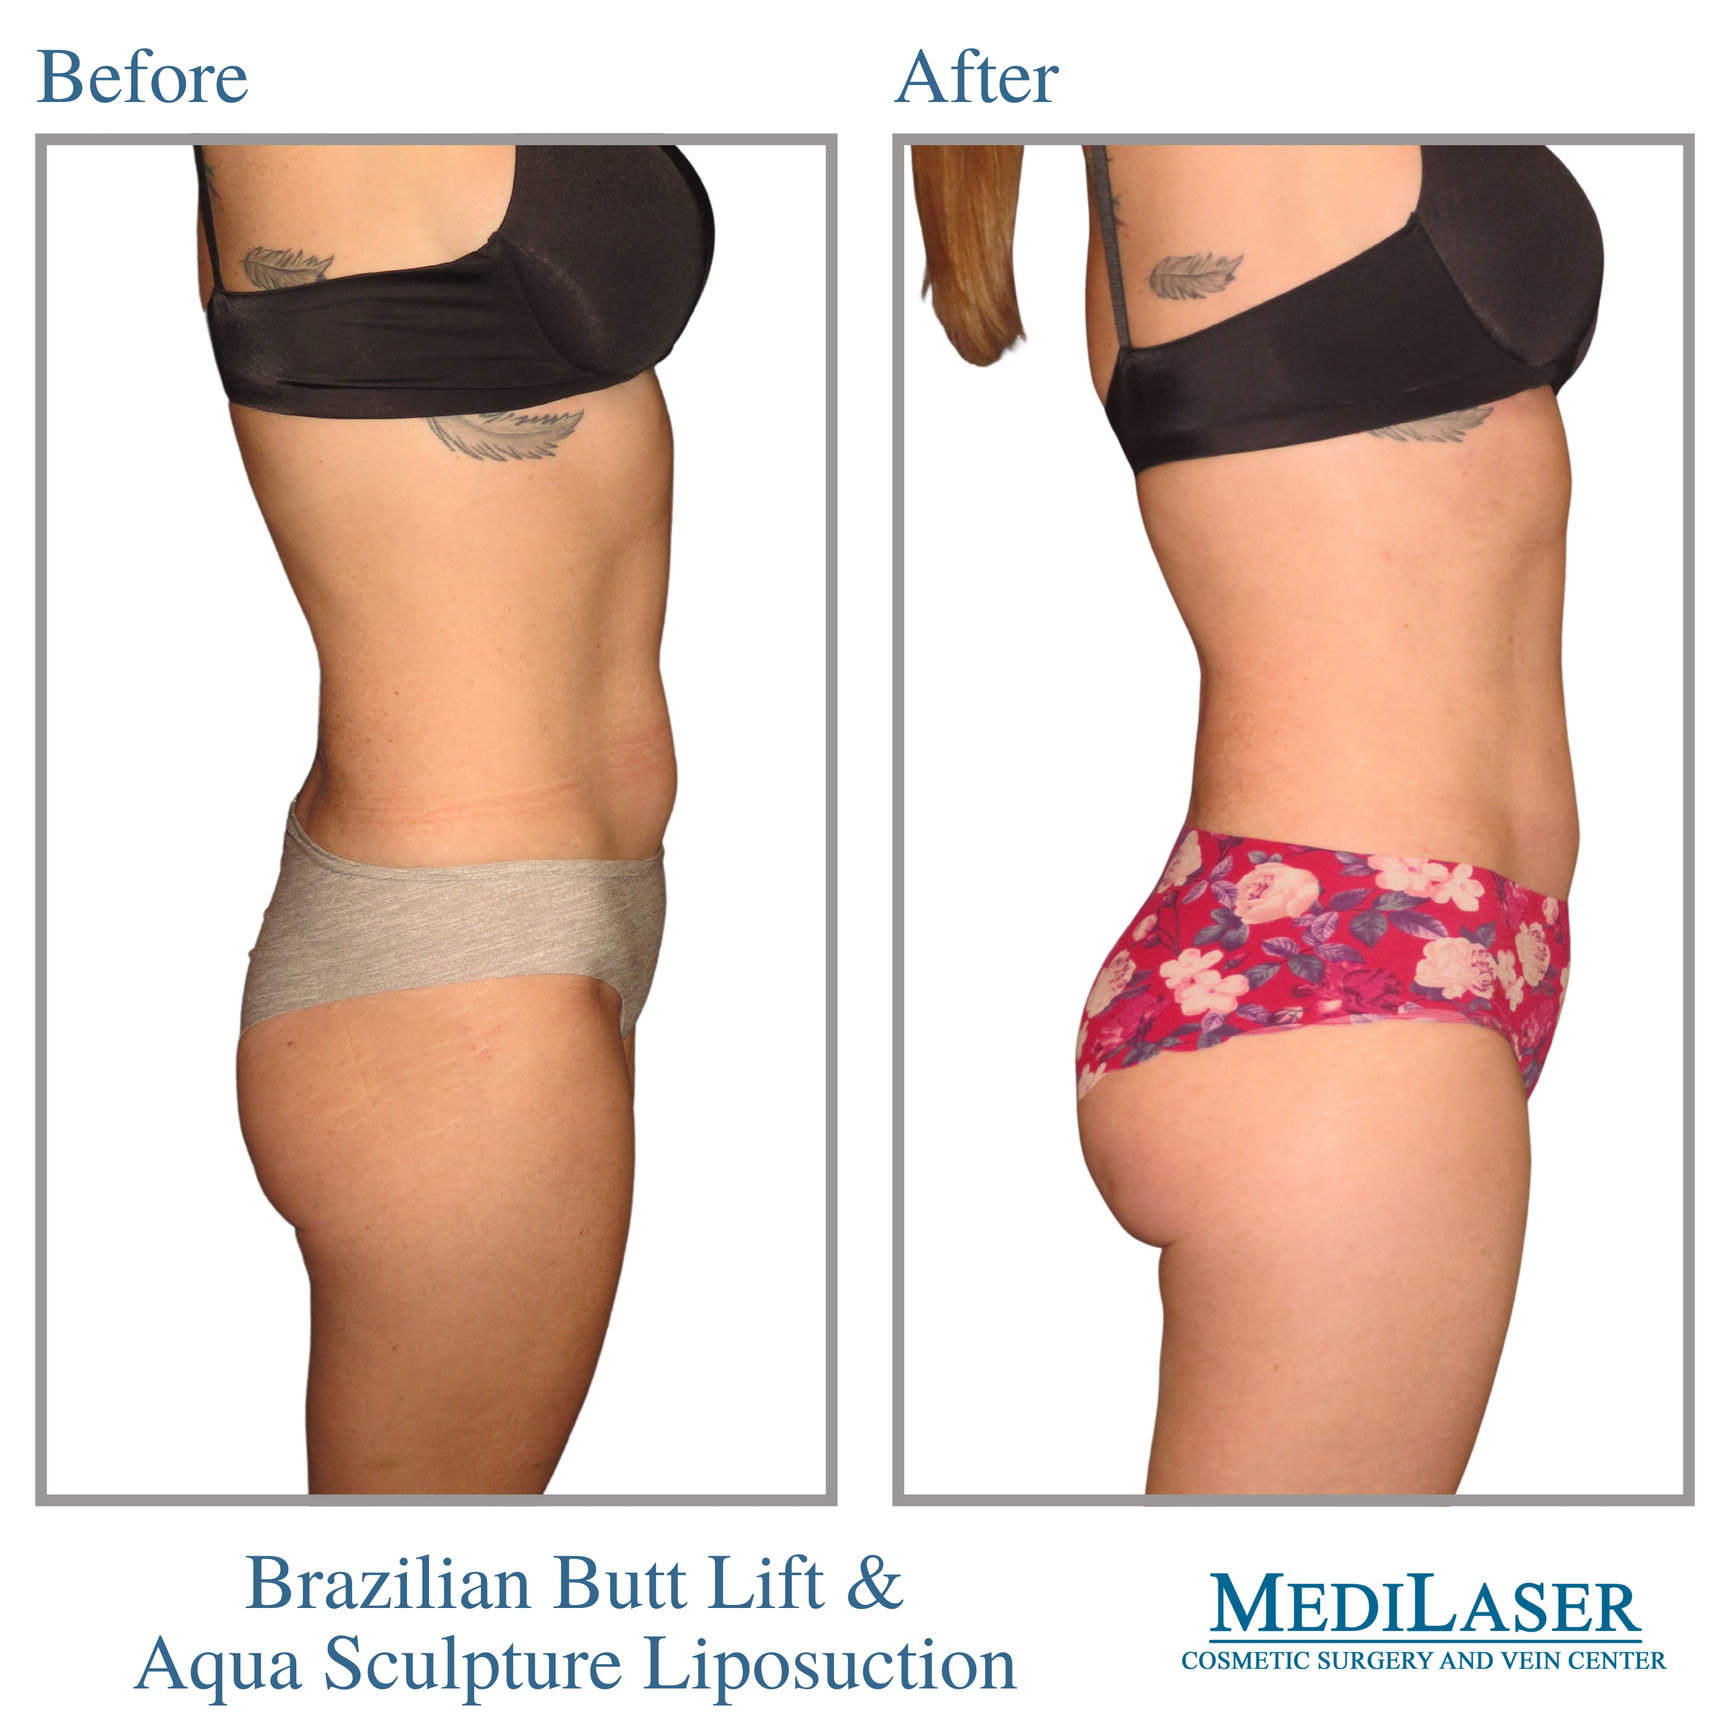 Brazilian Butt Lift Before and After - Medilaser Surgery and Vein